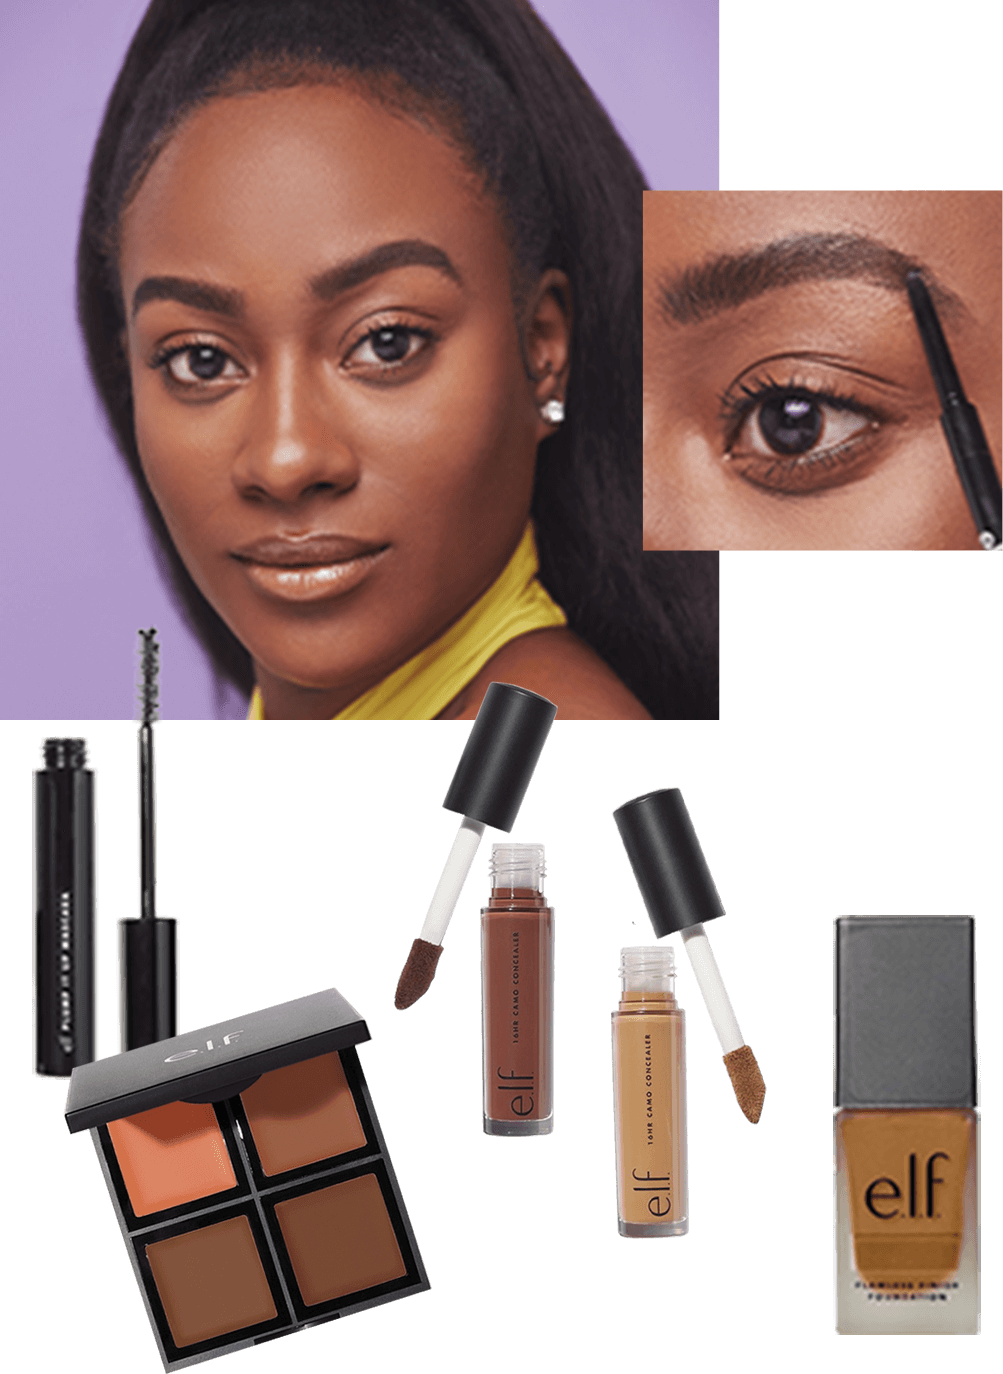 Monicastyle's featured e.l.f. products